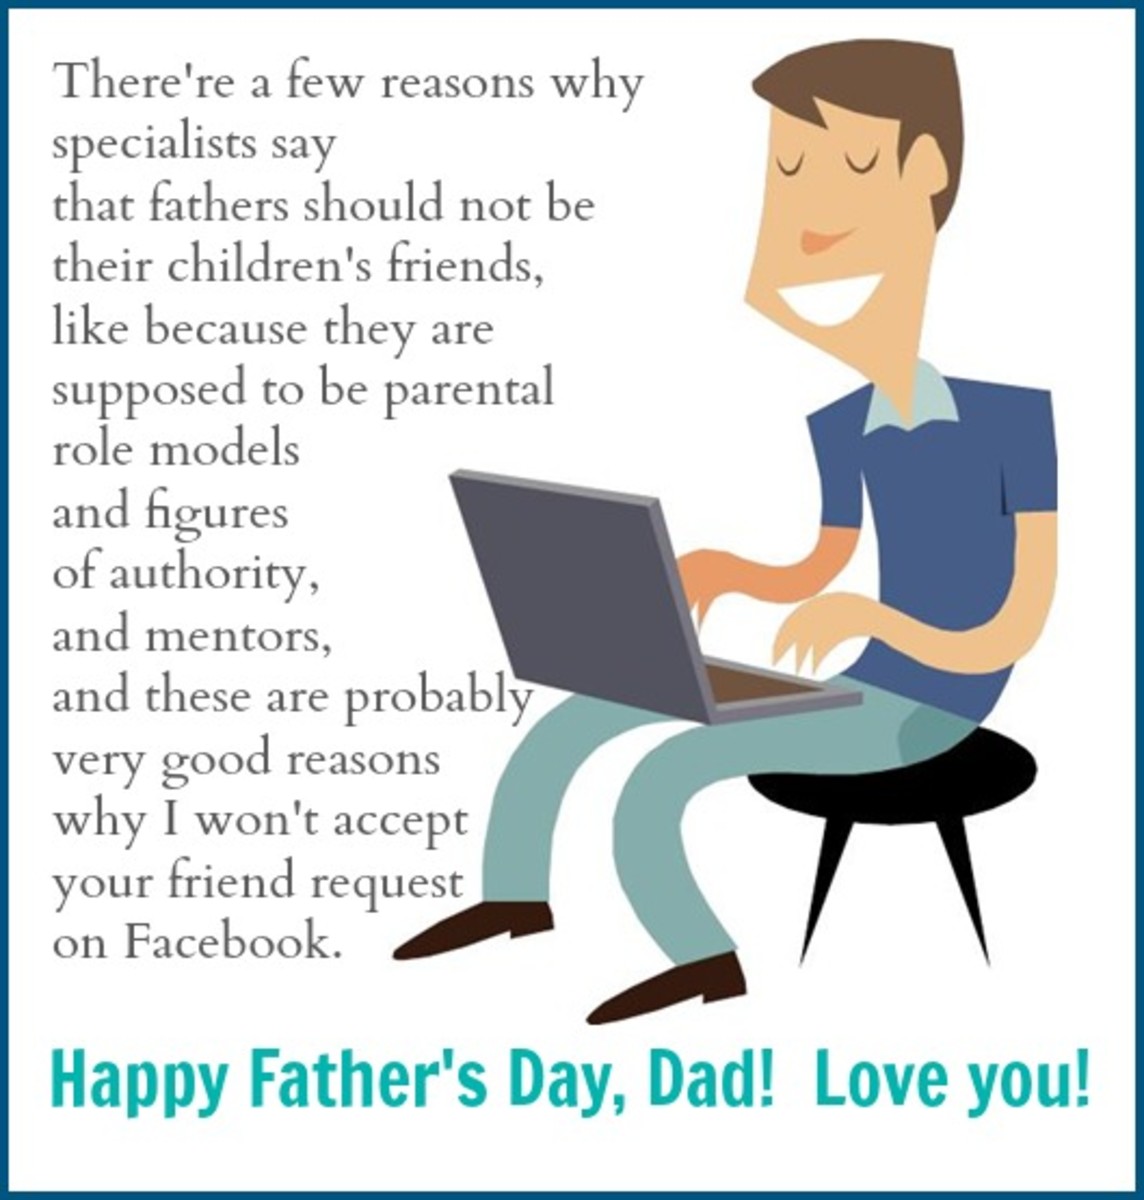 Funny Card about Not Letting Dad Be Friend on Facebook